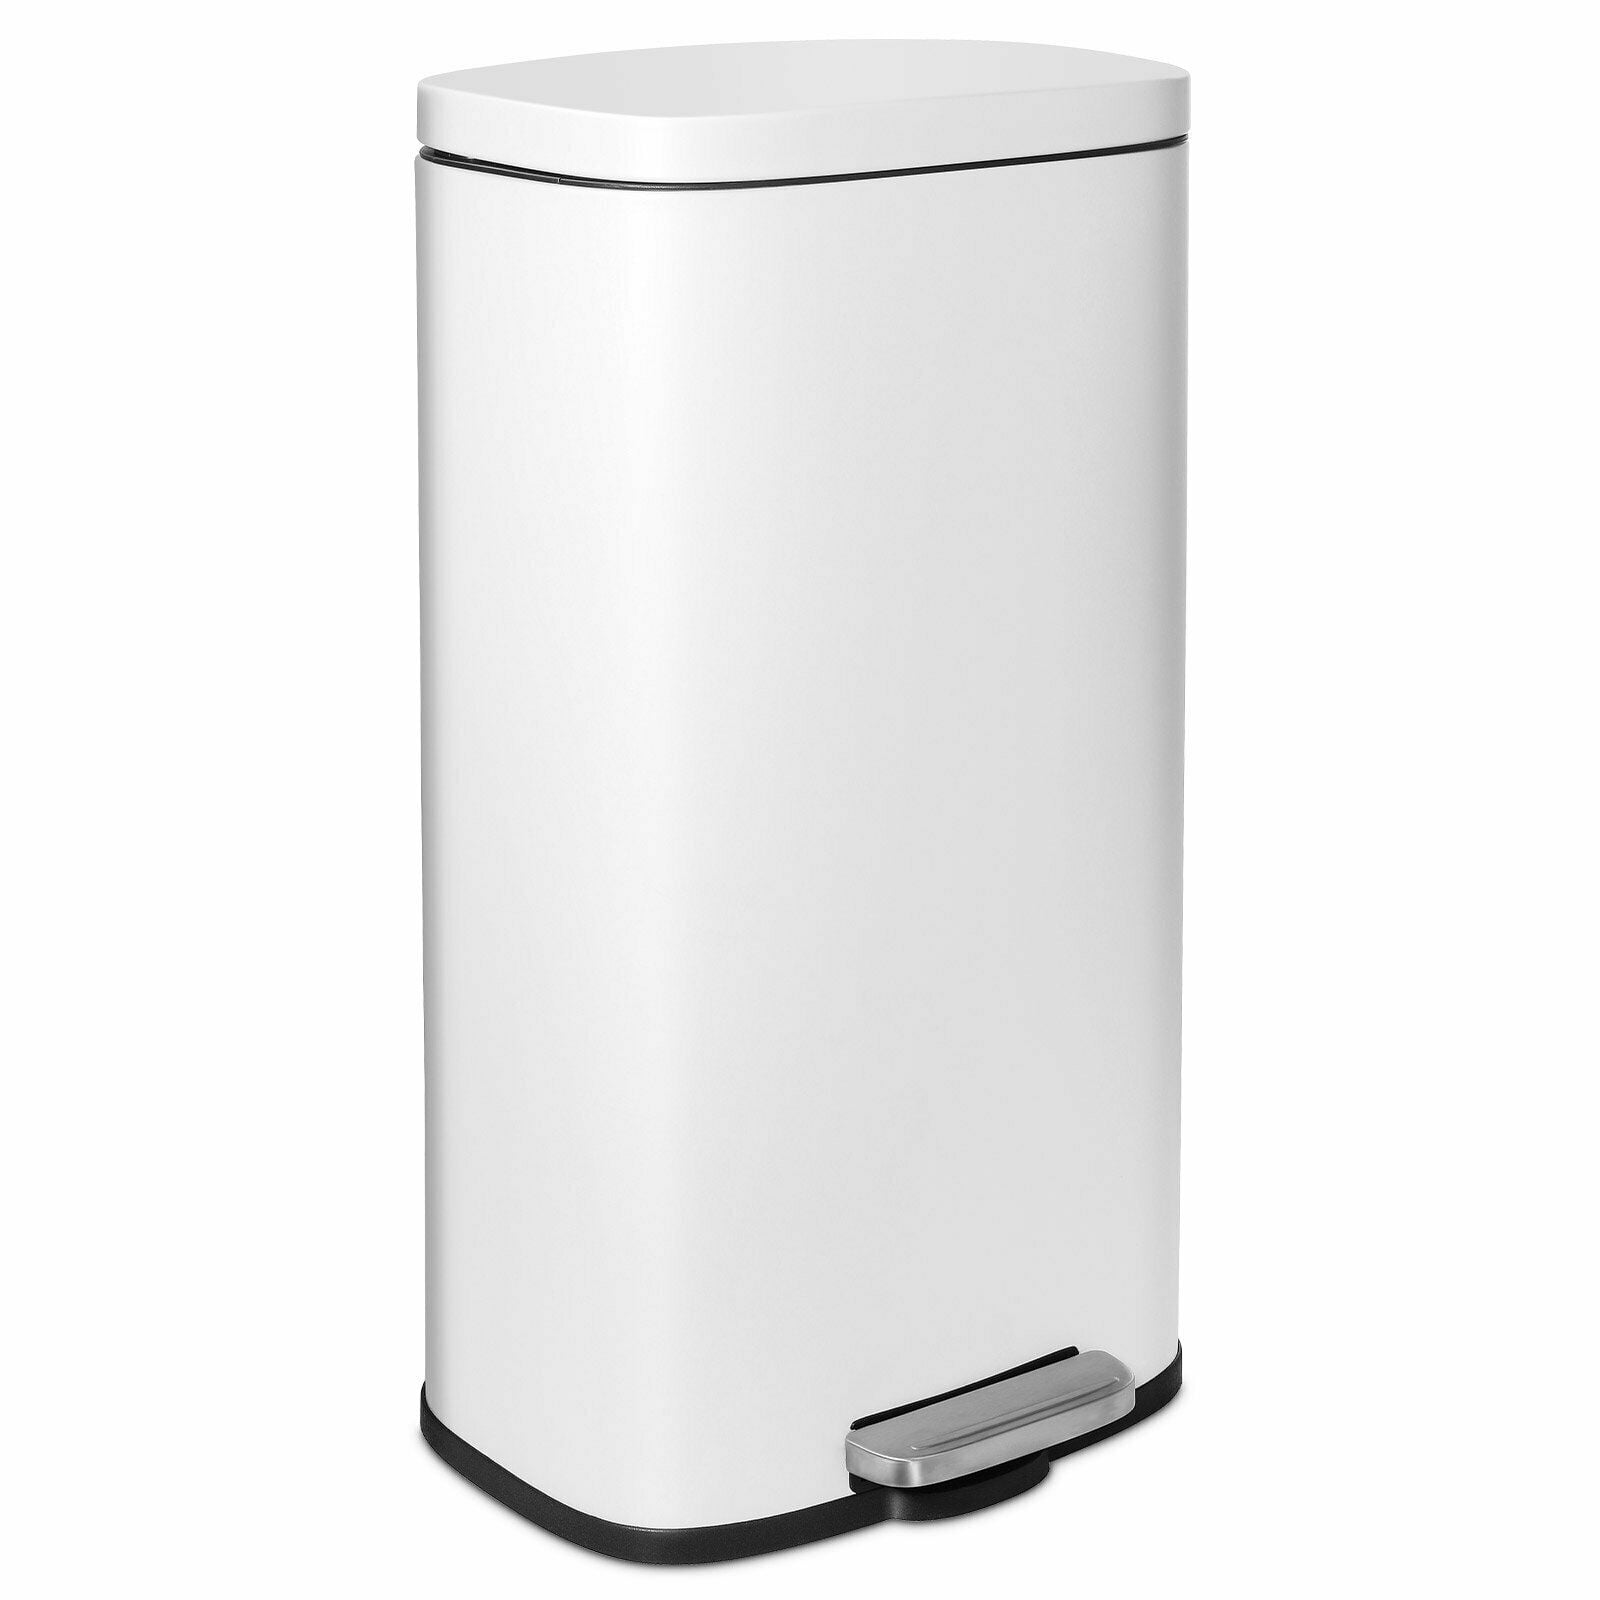 Details about   Trash Can Rectangle Pedal Bin,30 Liter 2 DAY DELIVERY 7.9 Gallon matte white 